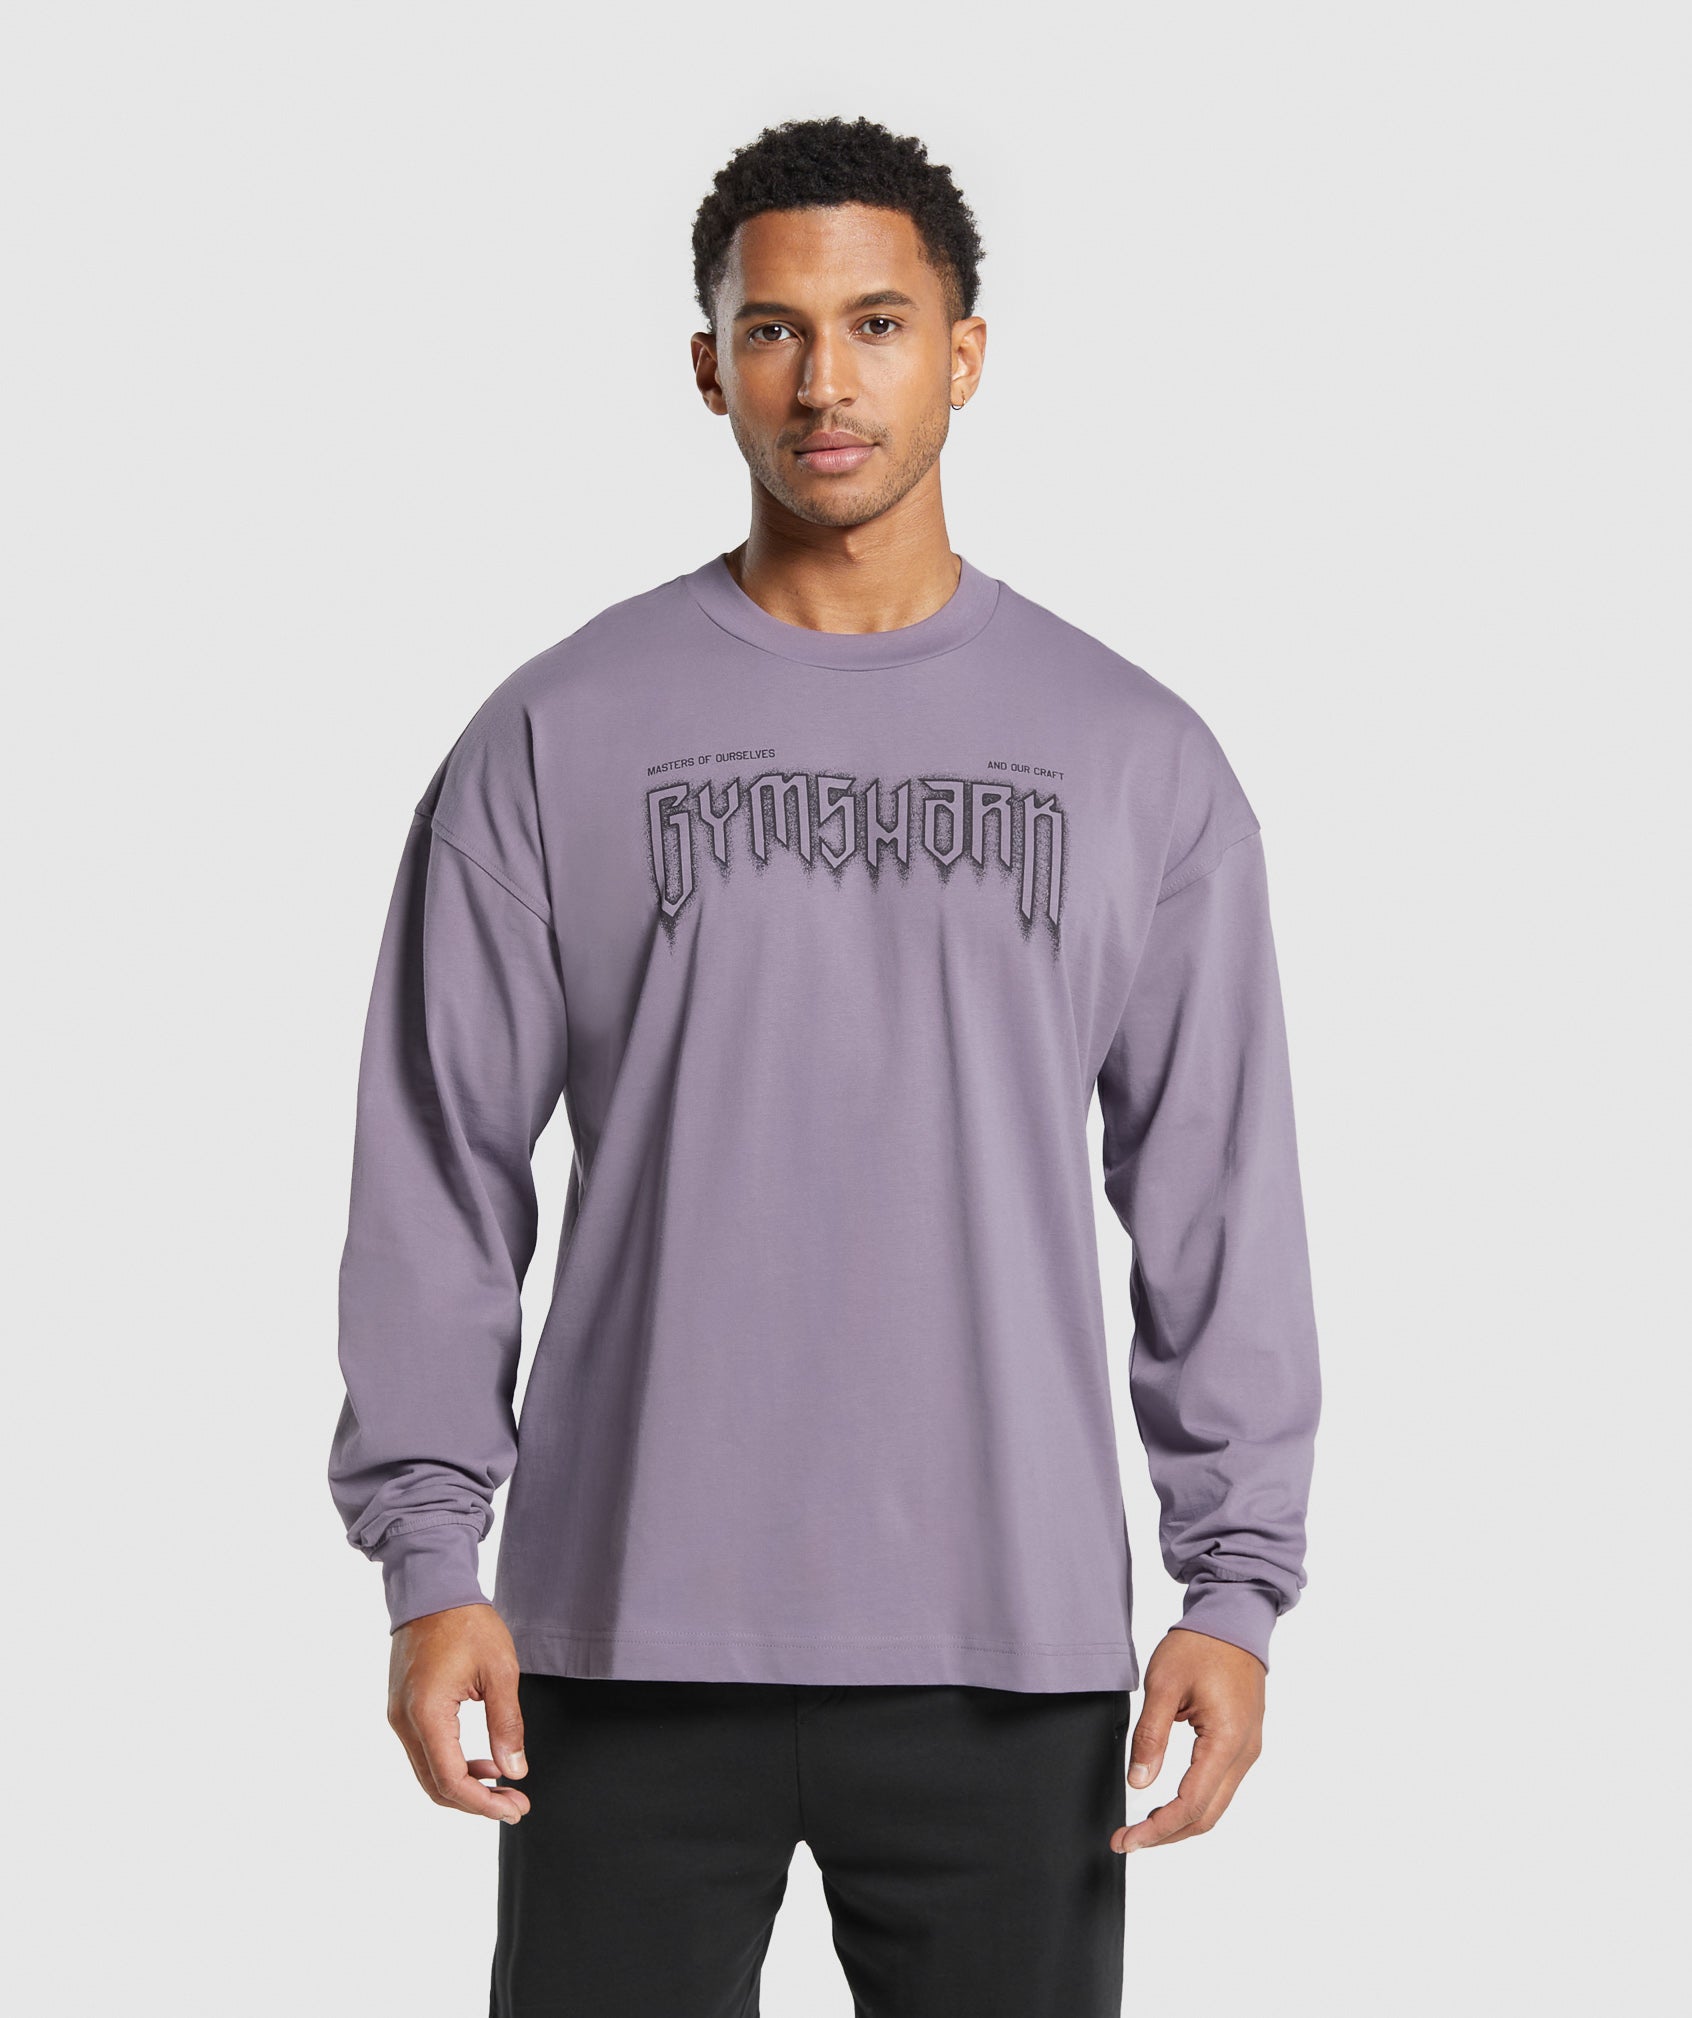 Masters of Our Craft Long Sleeve T-Shirt in Fog Purple - view 1